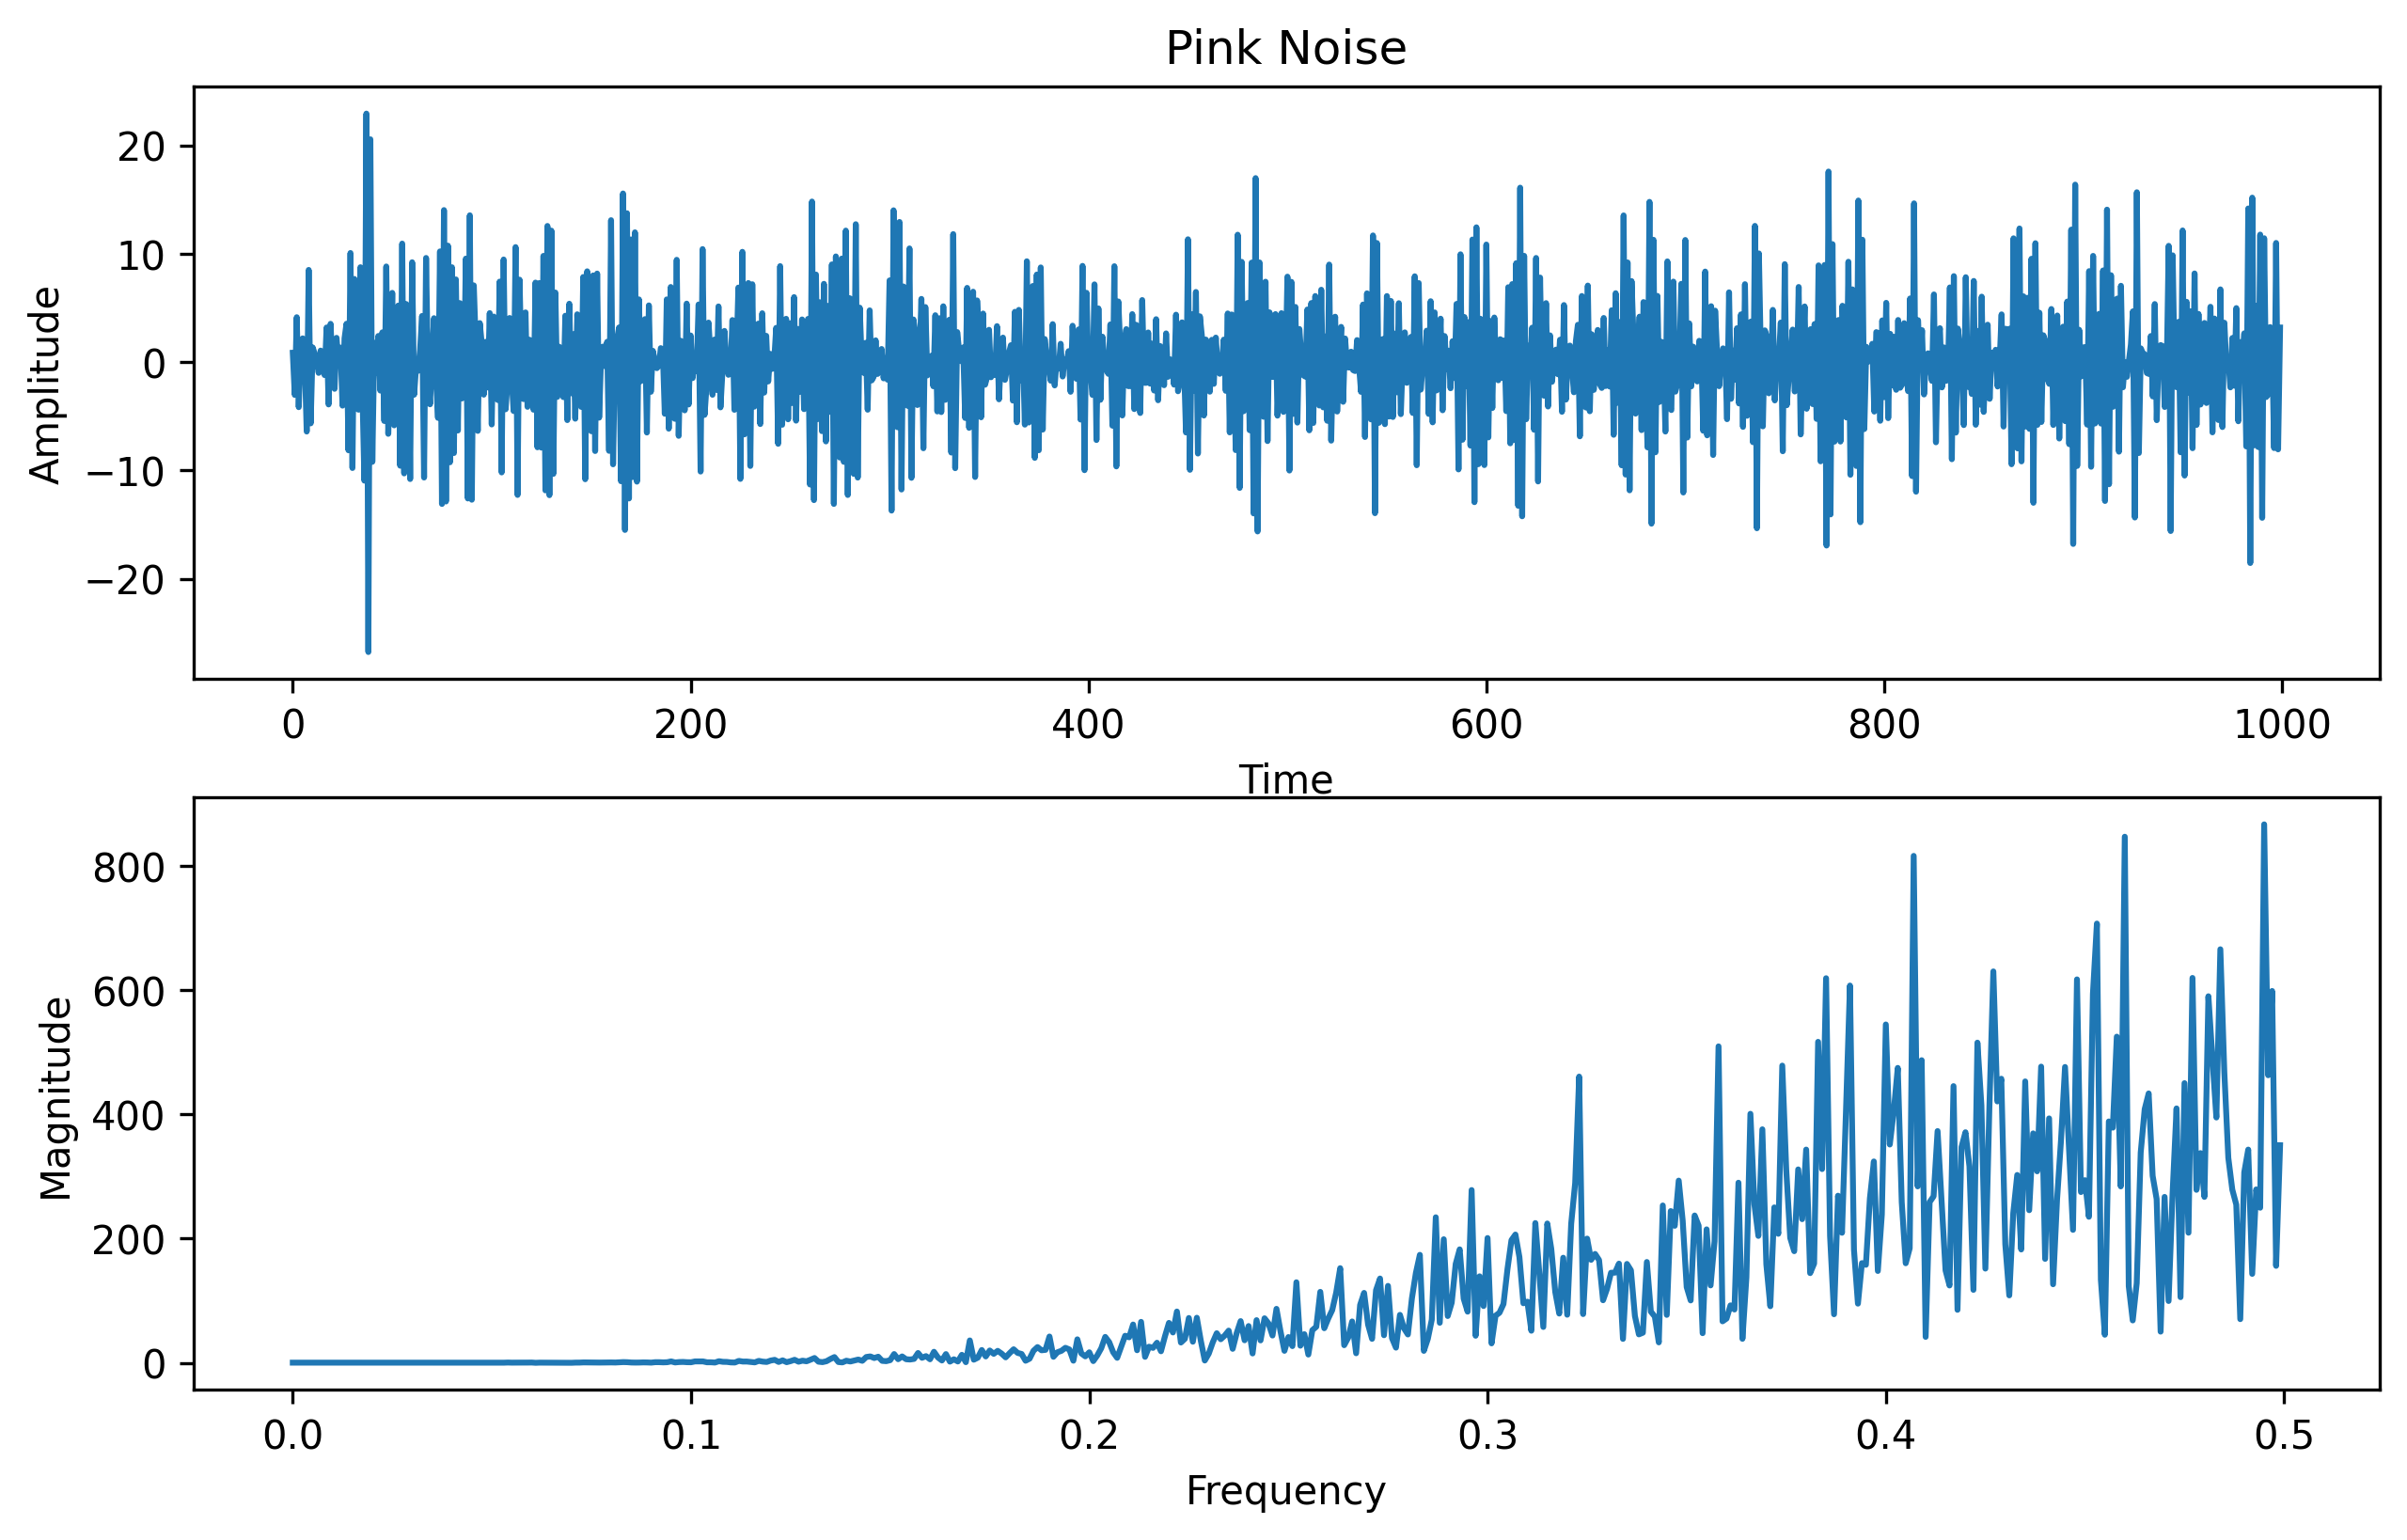 Pink Noise and its Spectral Content